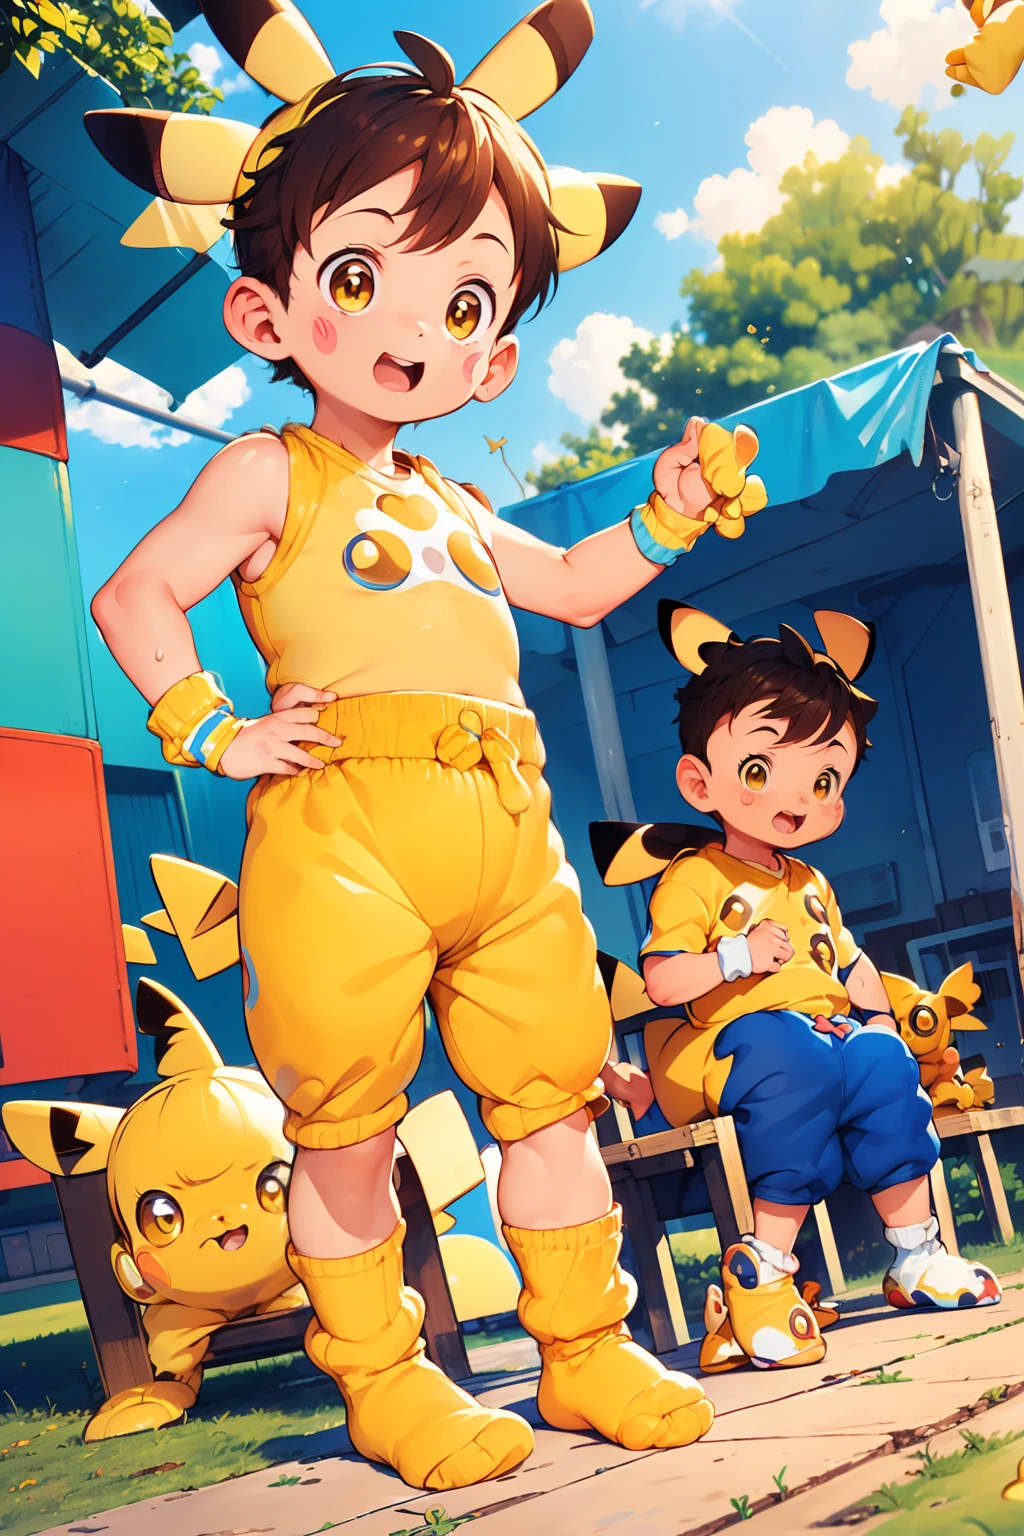 chubby Little boy with golden hair and shiny gold colored eyes and colorful socks wearing a pikachu costume sitting on a bench, young, boy, , small, toddler, soft light, (socks:1.4), (little boy:1.4), (shota:1.4), (cute:1.4), (small:1.6), (yellow socks:1.8), (pikachu costume:1.8), (sweatpants:1.6),